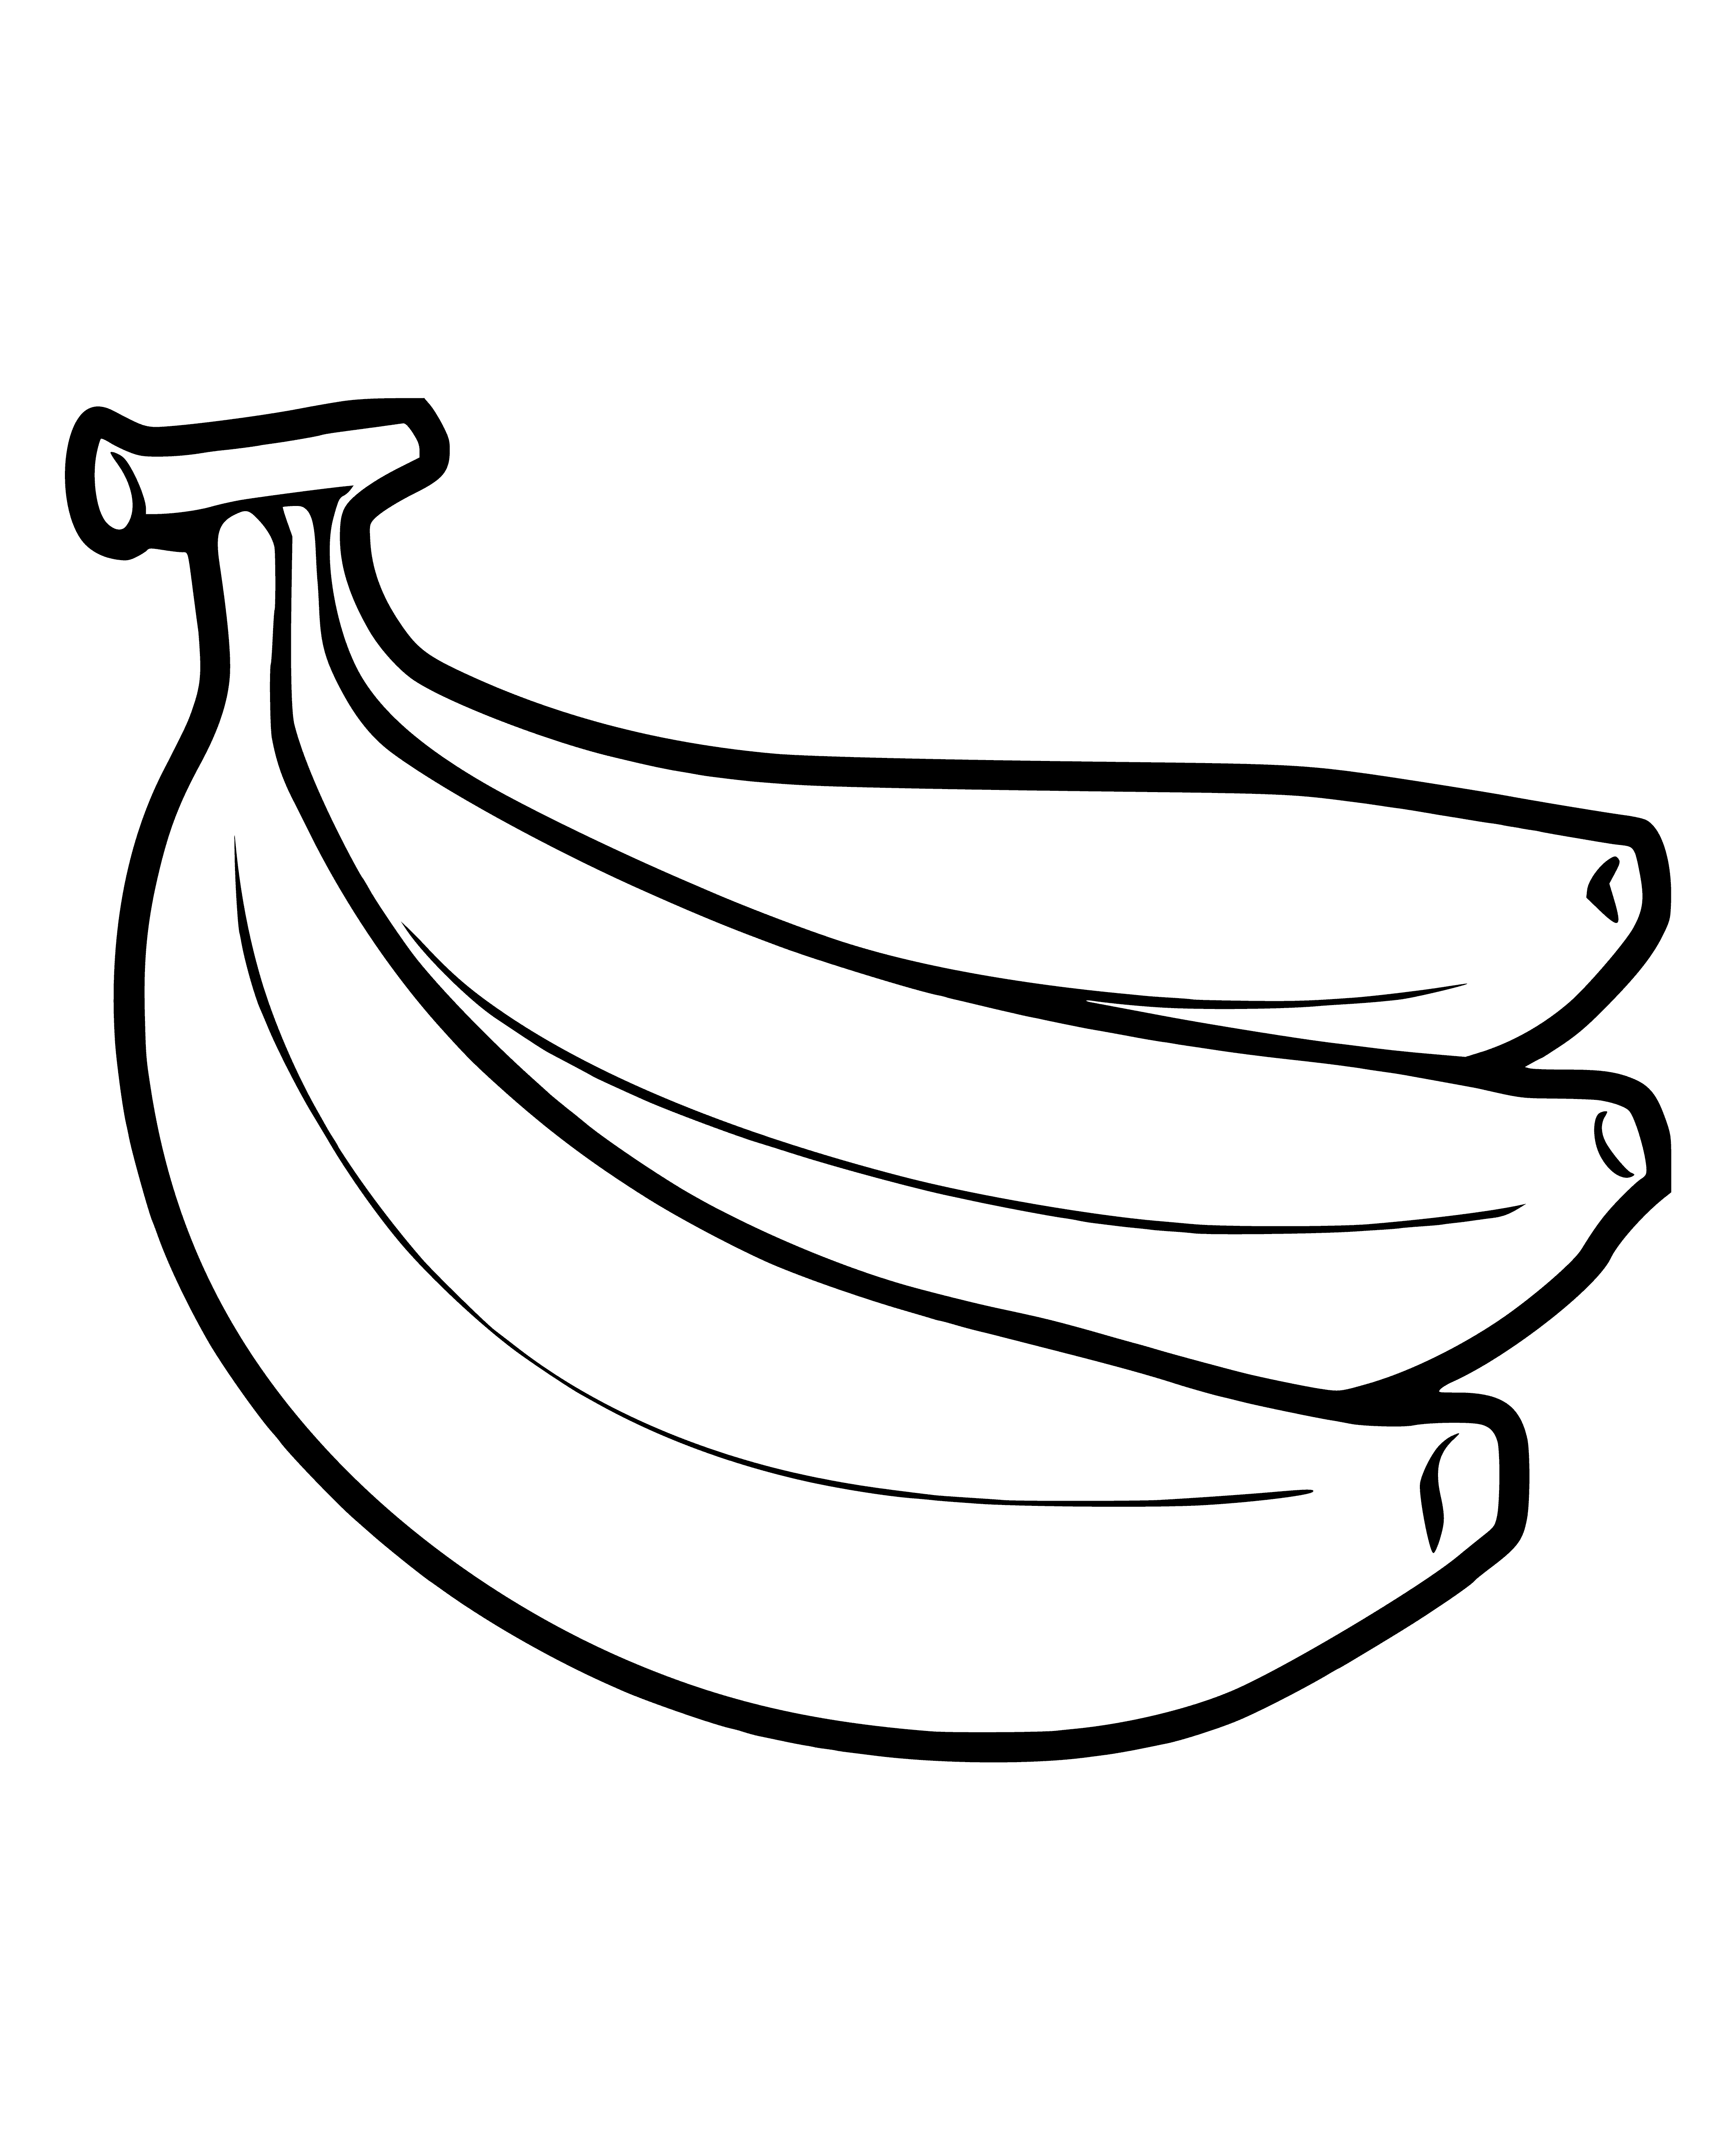 coloring page: Bananas hang from tree, yellow with brown spots & vary in size, some with leaves attached.